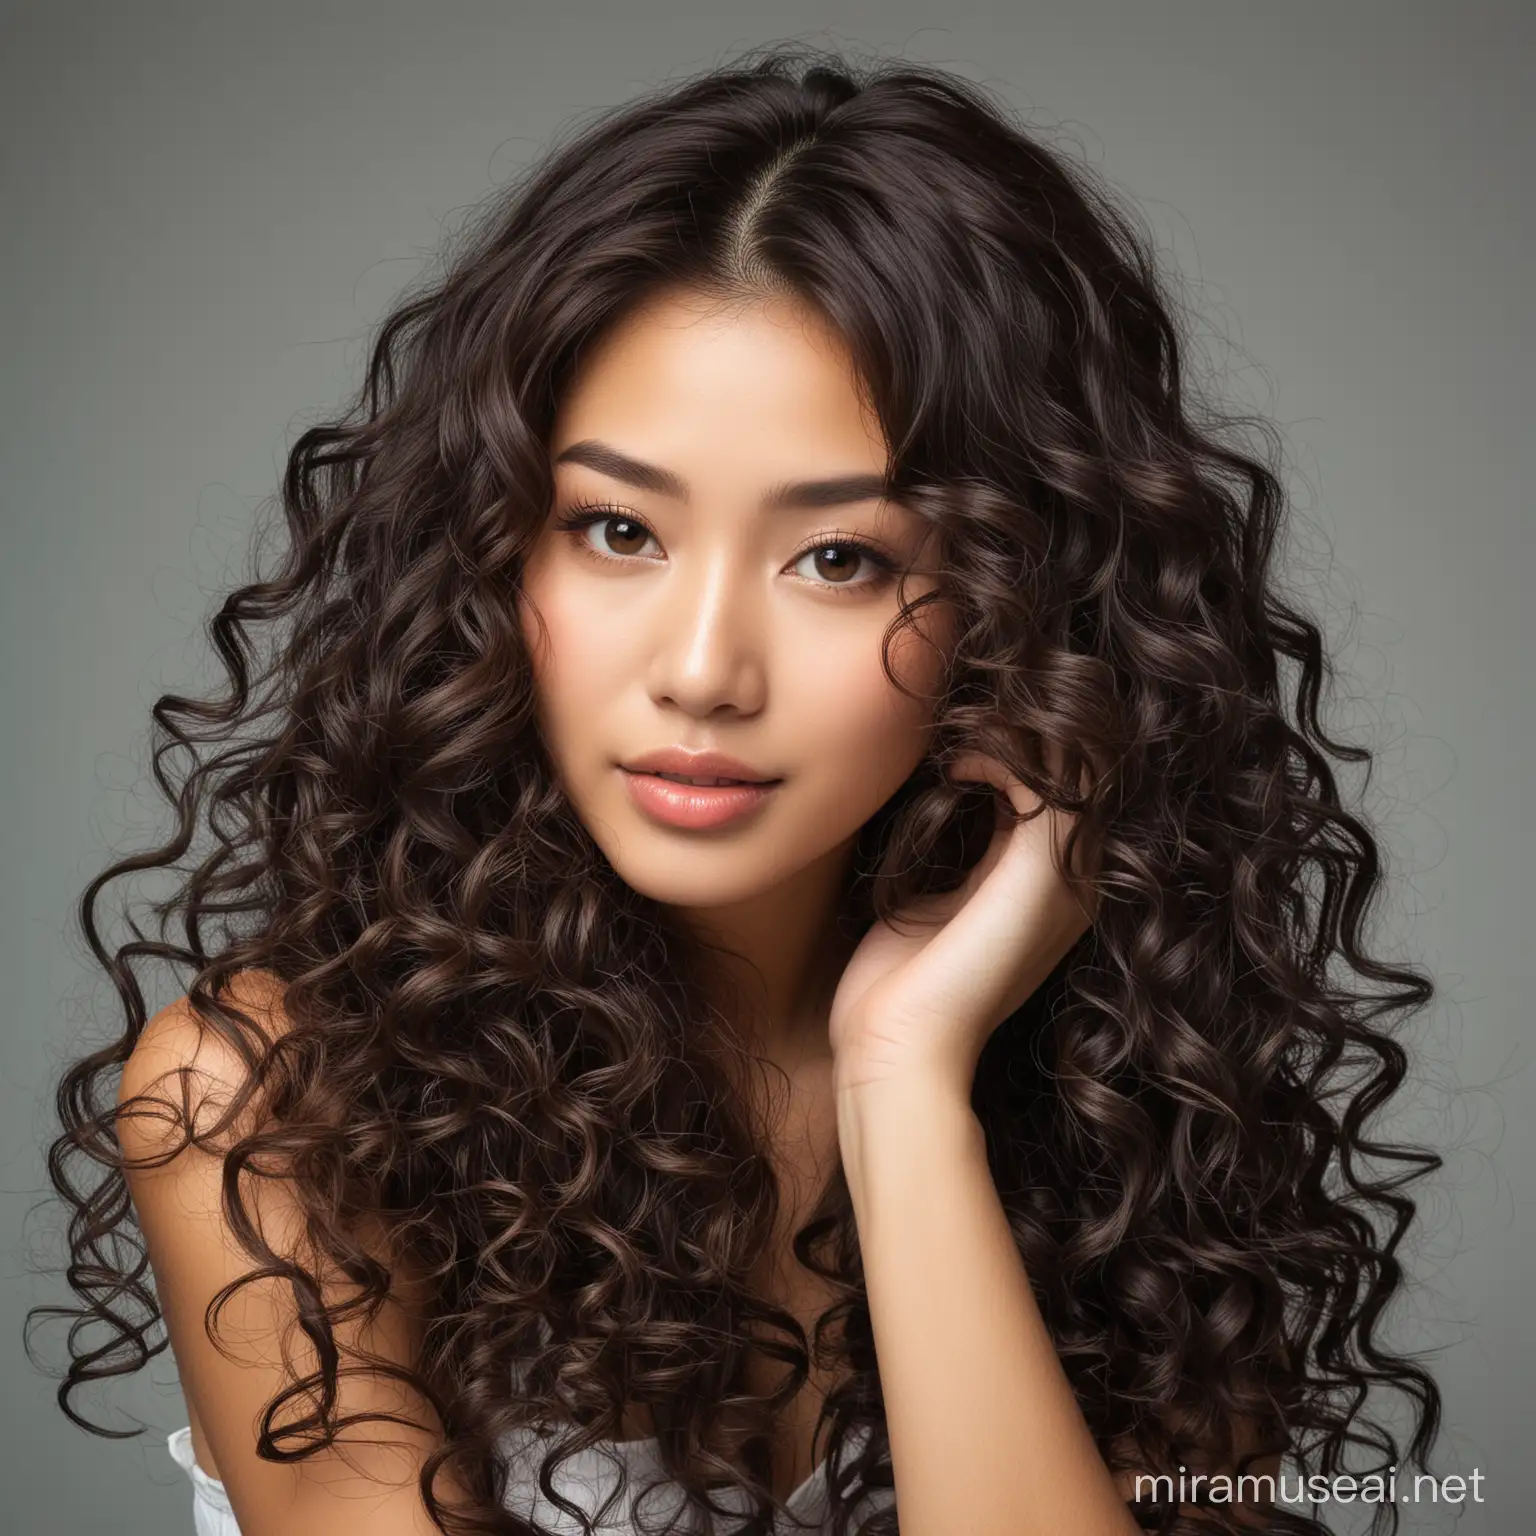 beautiful Asian woman with long curly hair